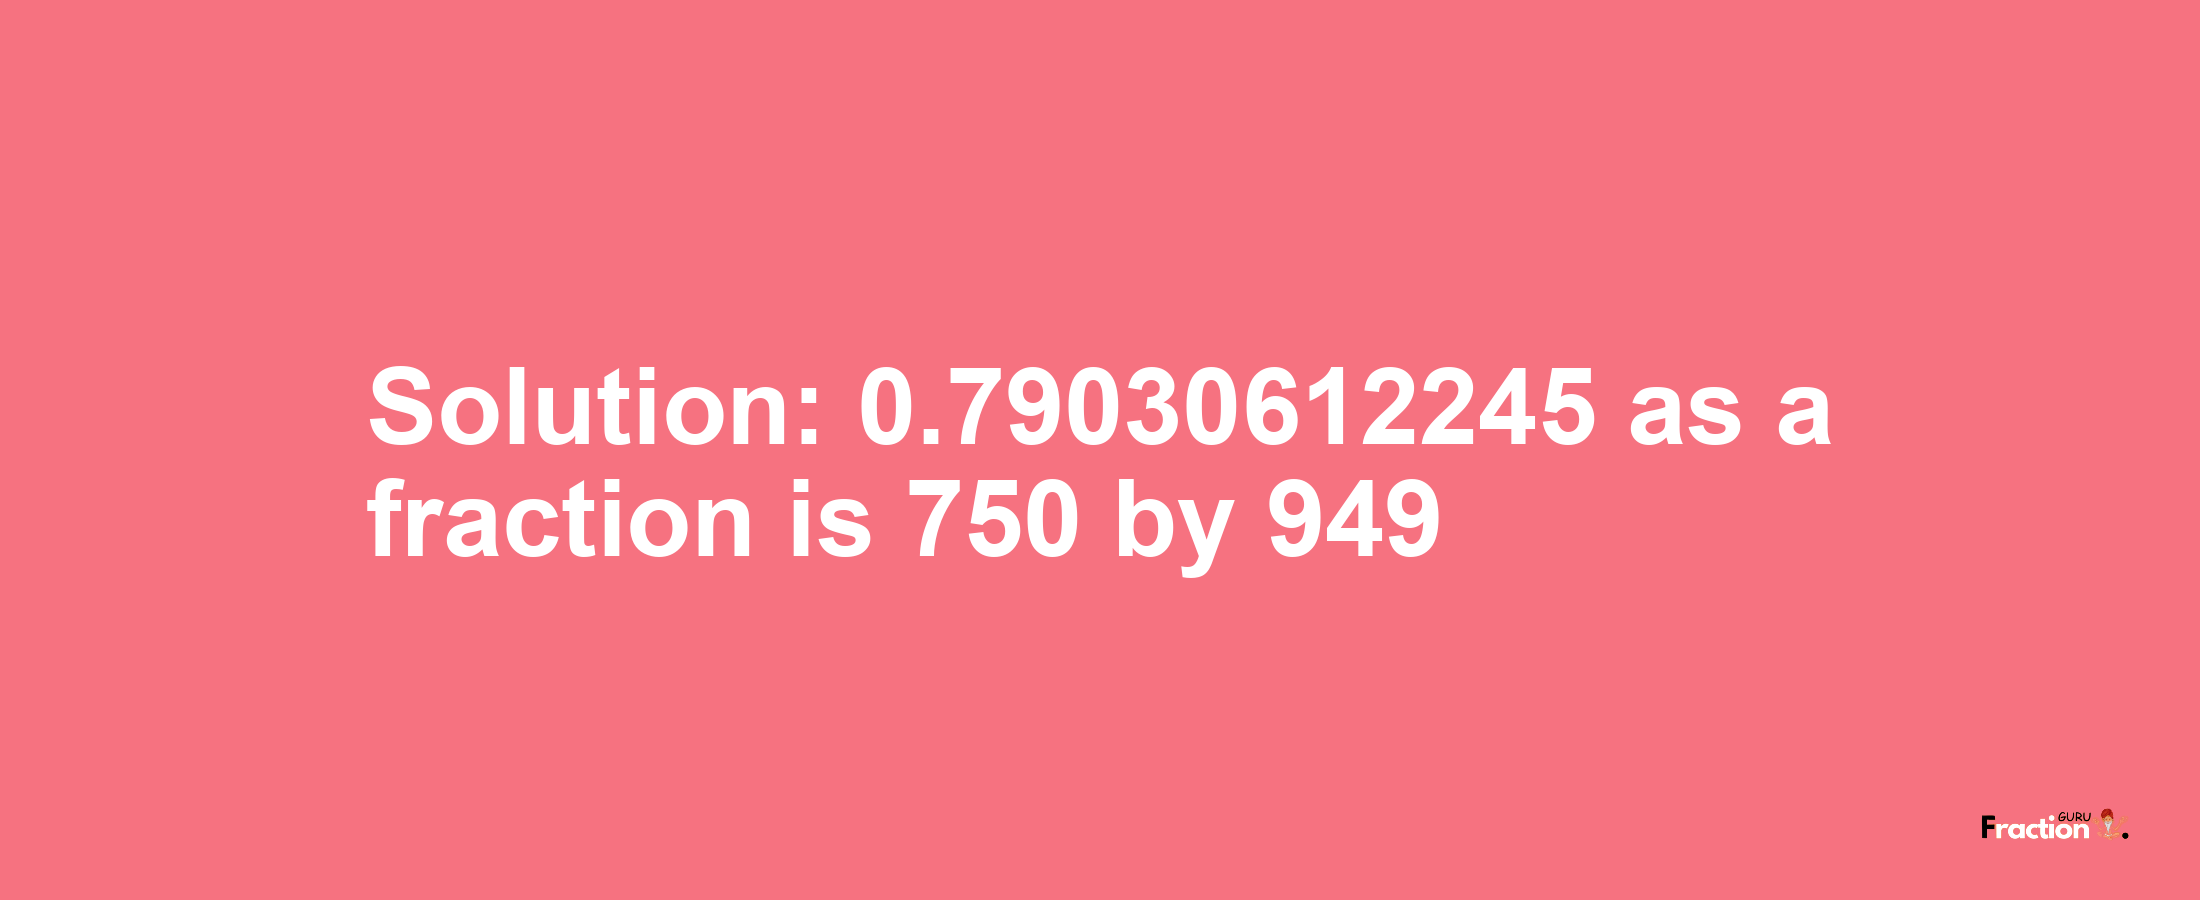 Solution:0.79030612245 as a fraction is 750/949